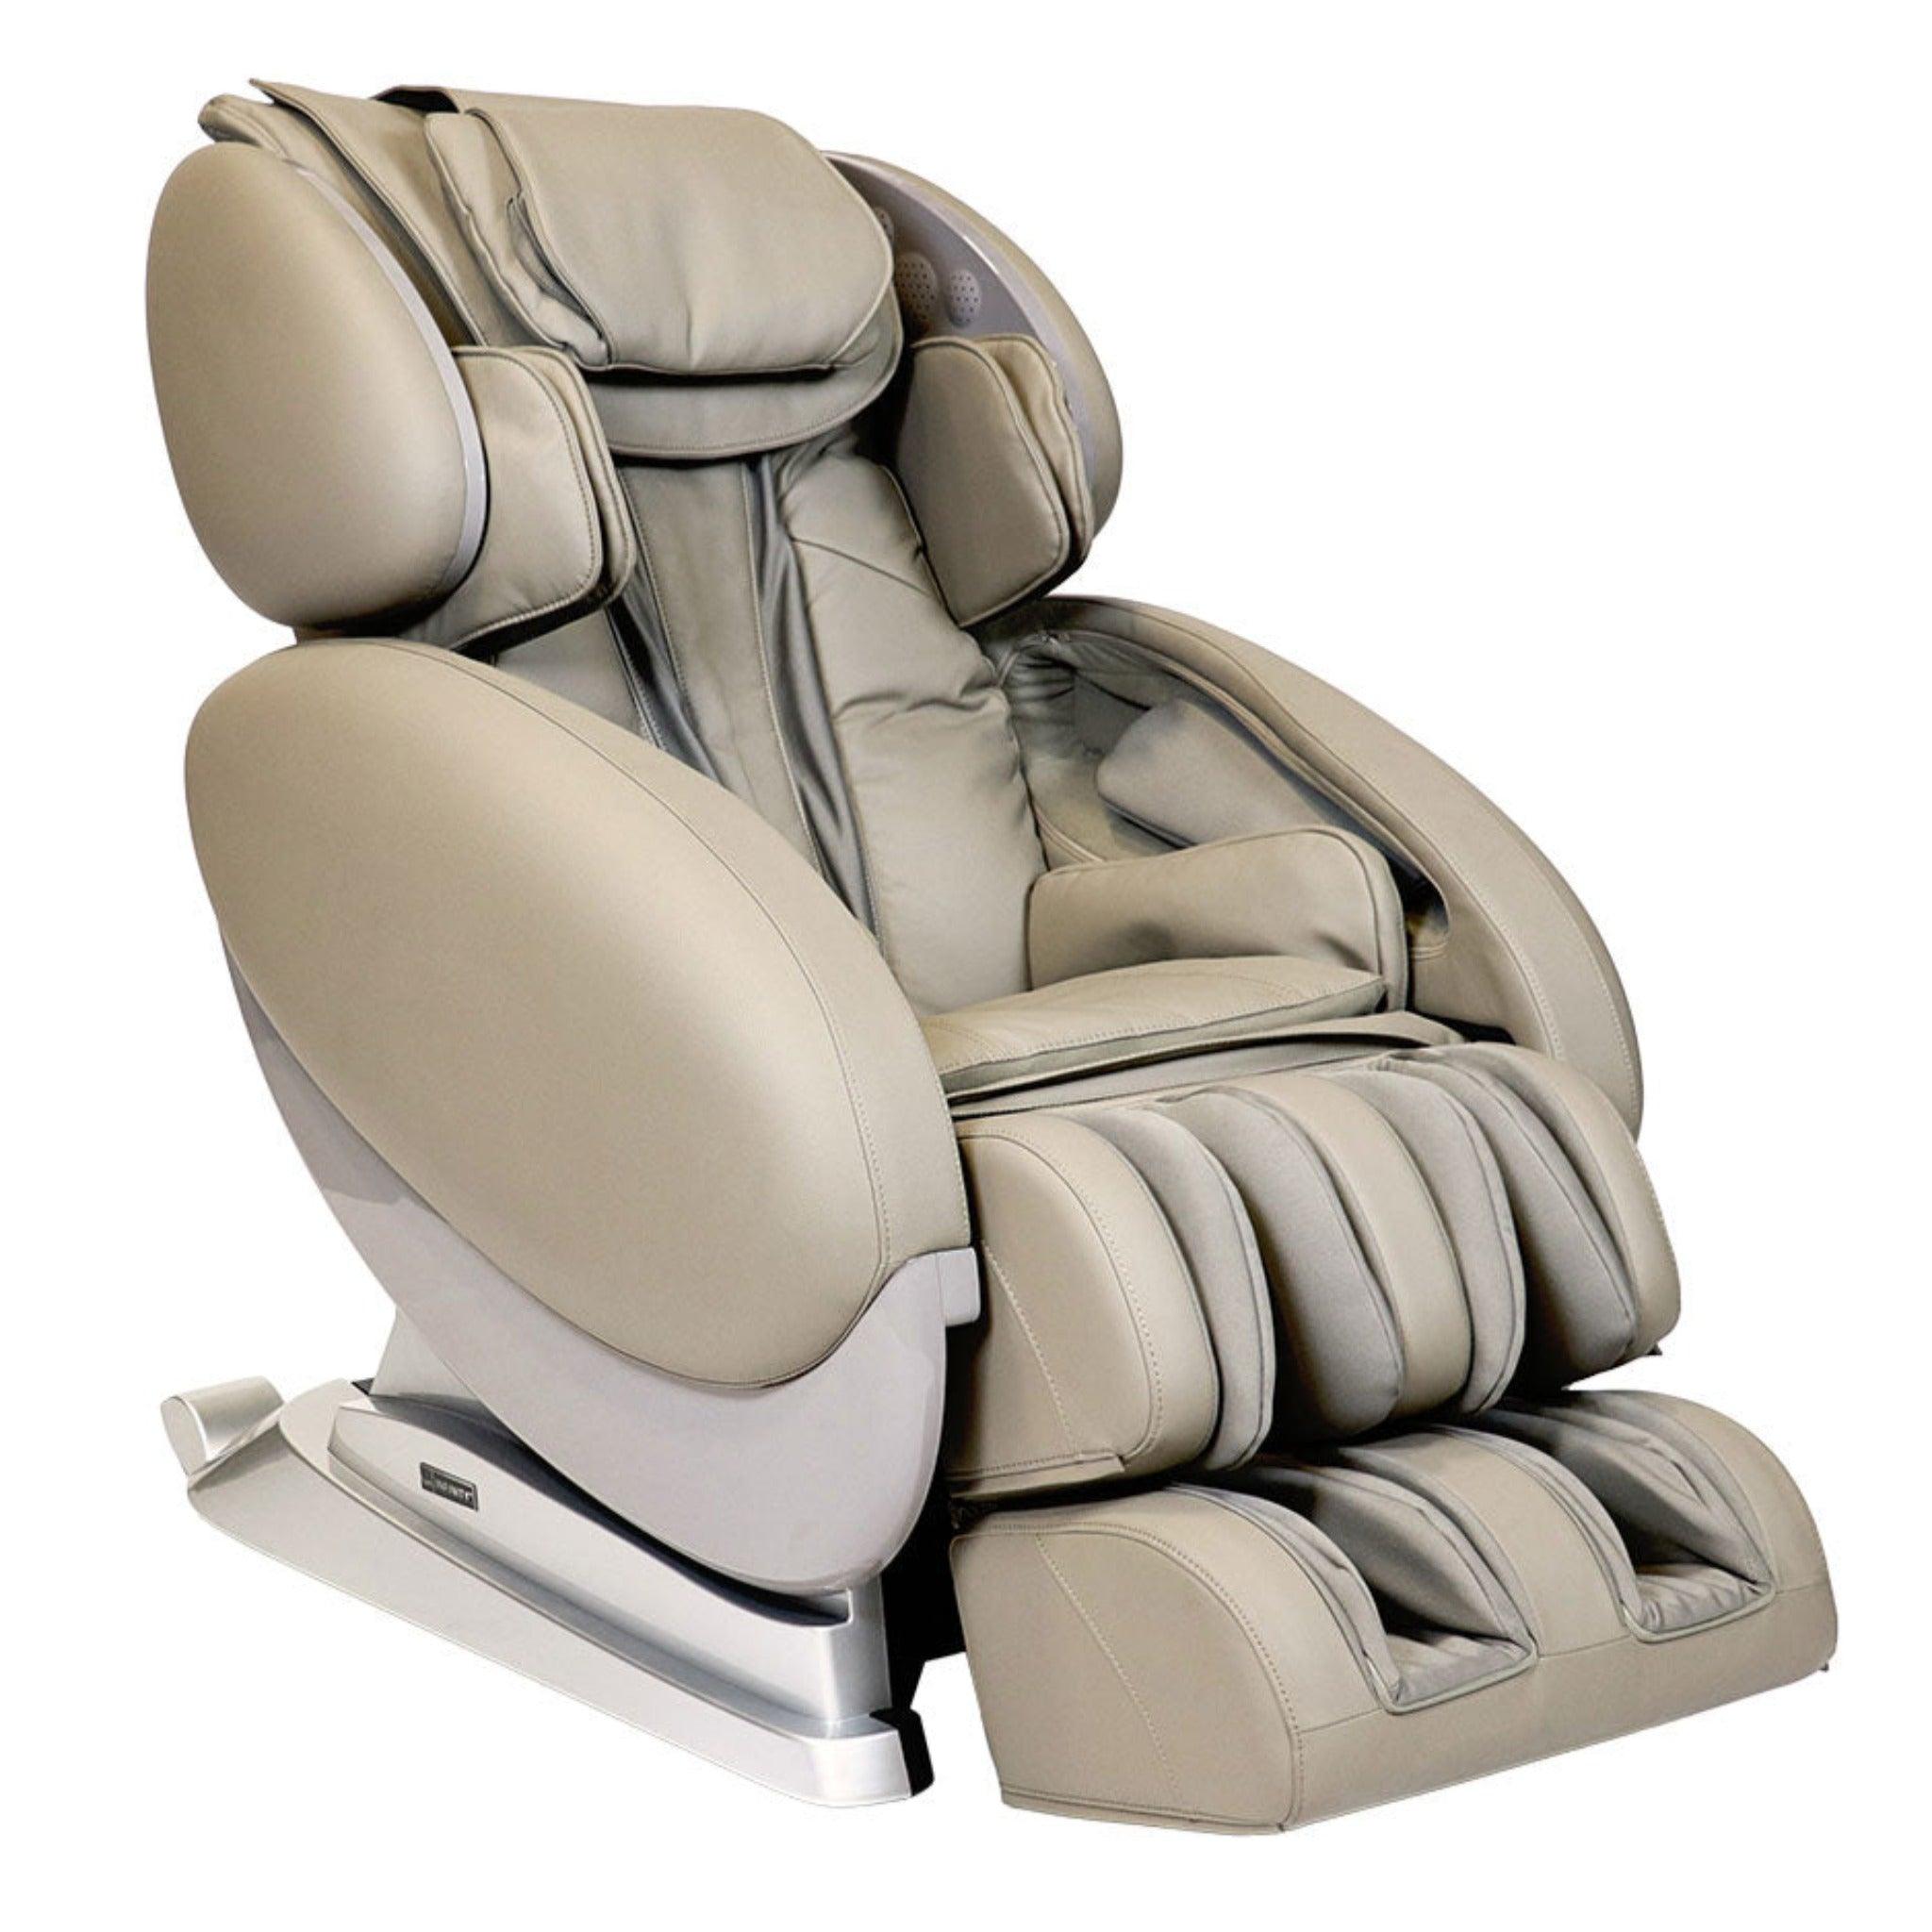 3D/4D Infinity IT-8500 X3 Massage Chair (Certified Pre-owned) | Grade A